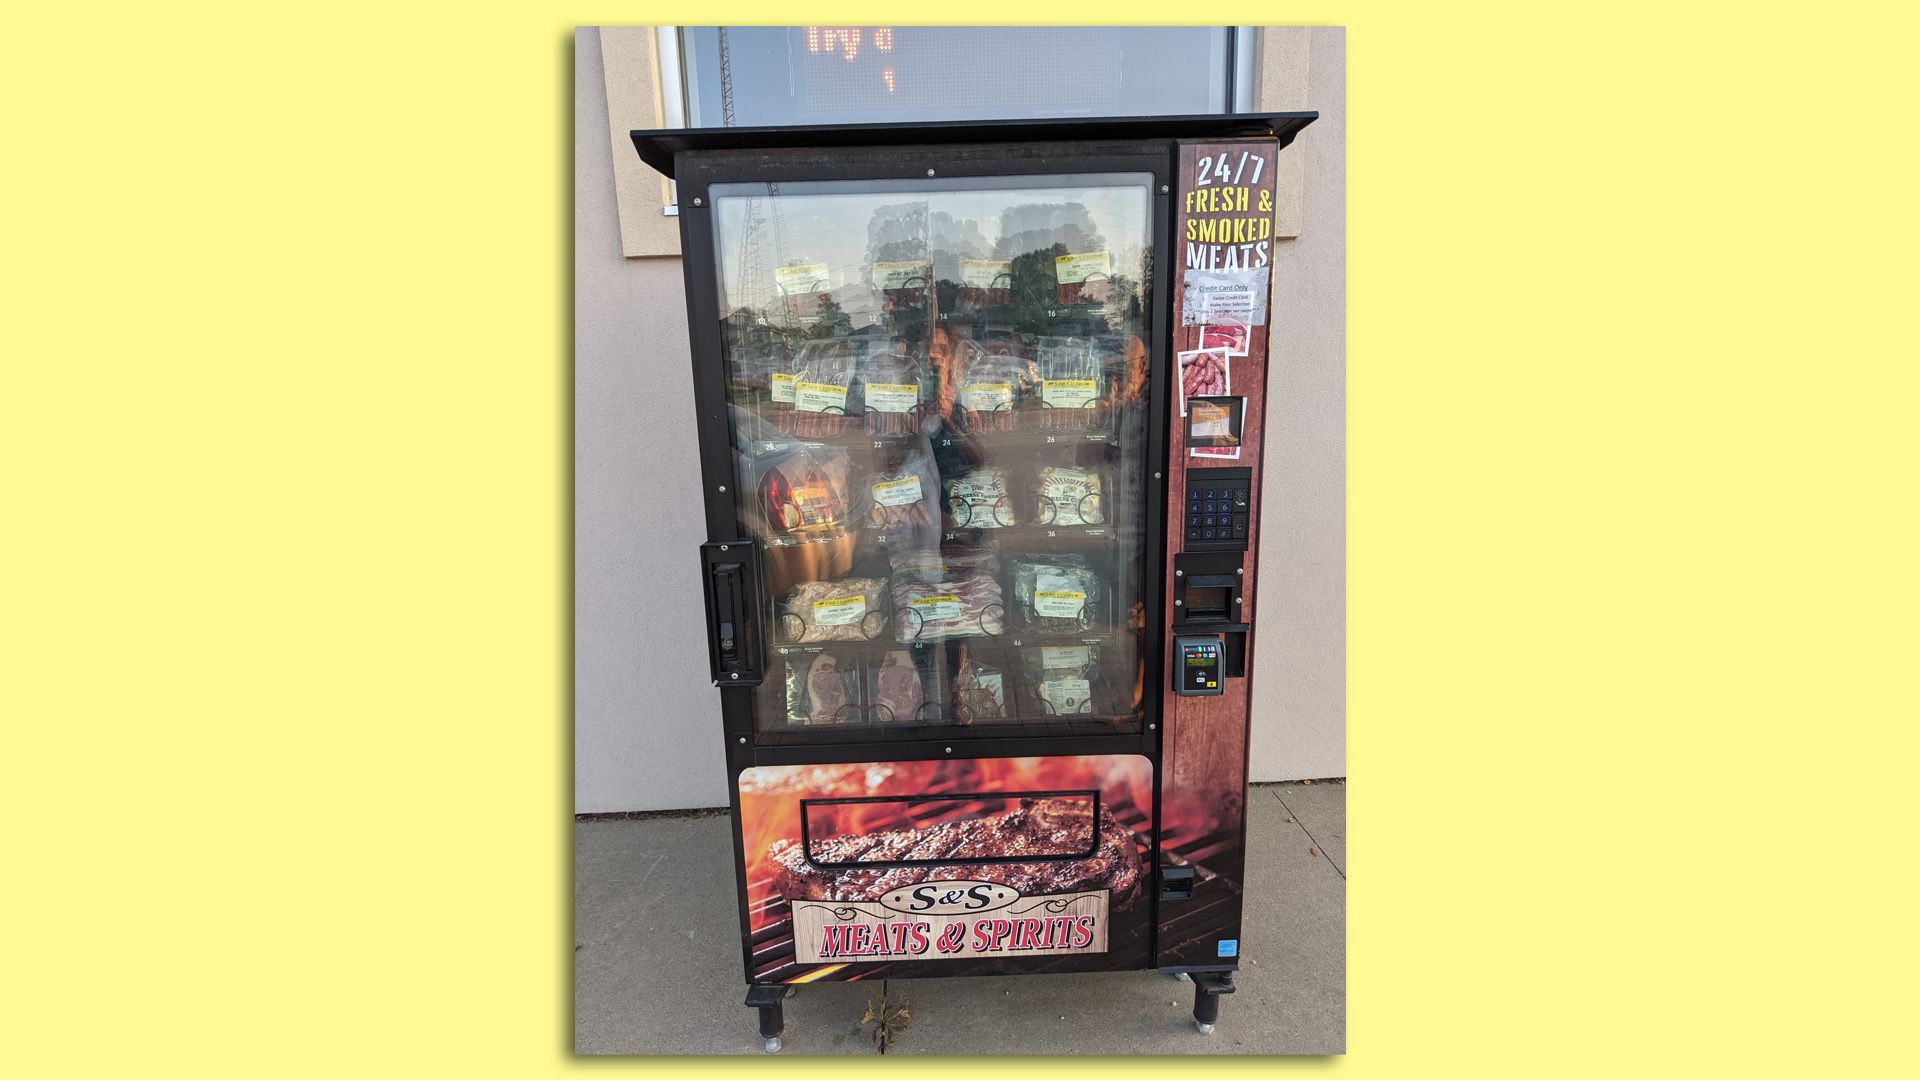 An outdoor vending machine that dispenses meat.